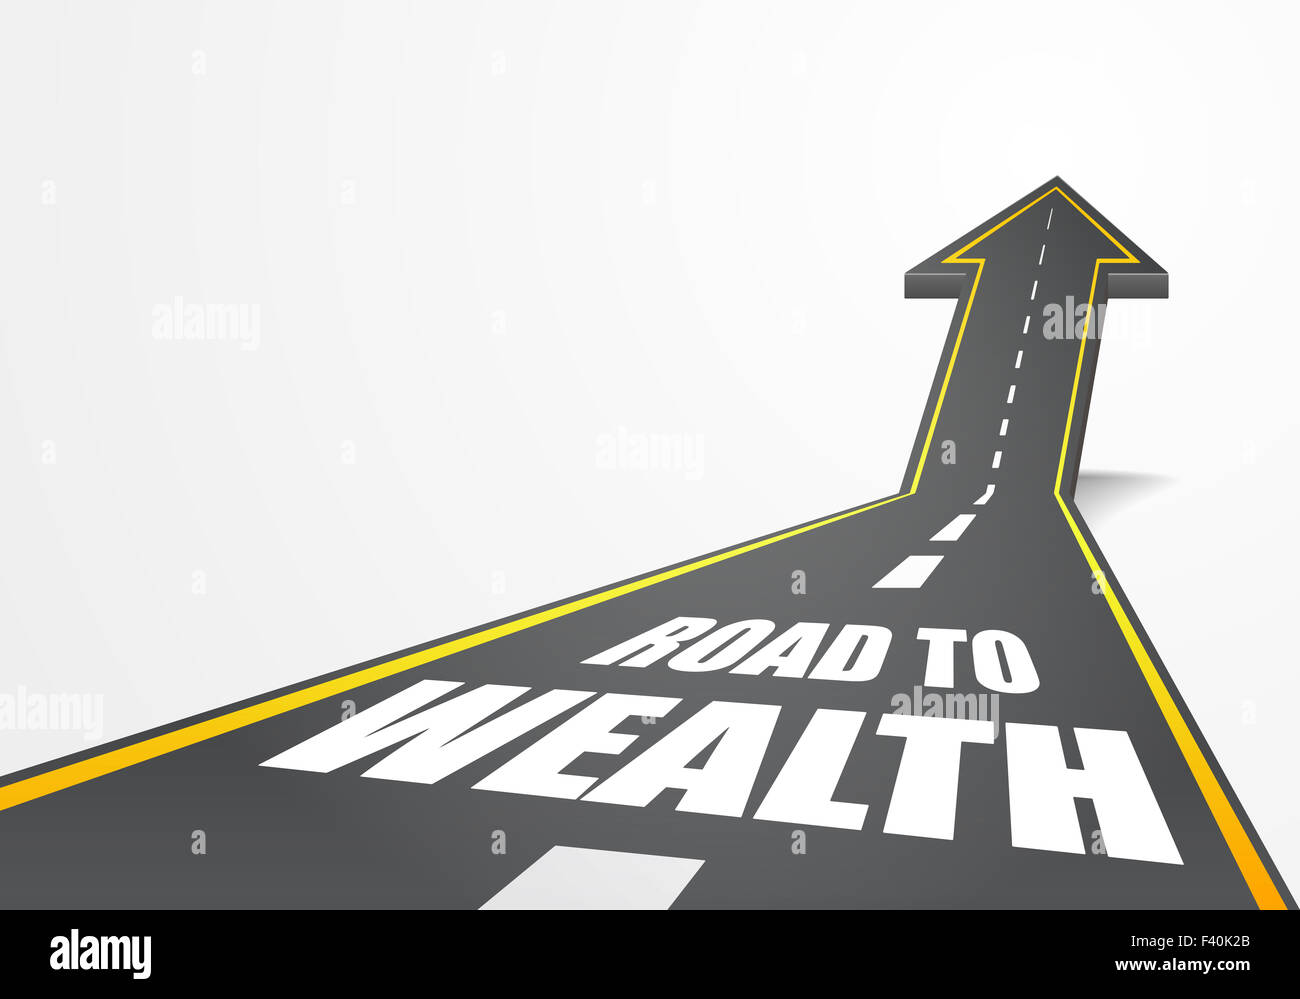 road to wealth Stock Photo